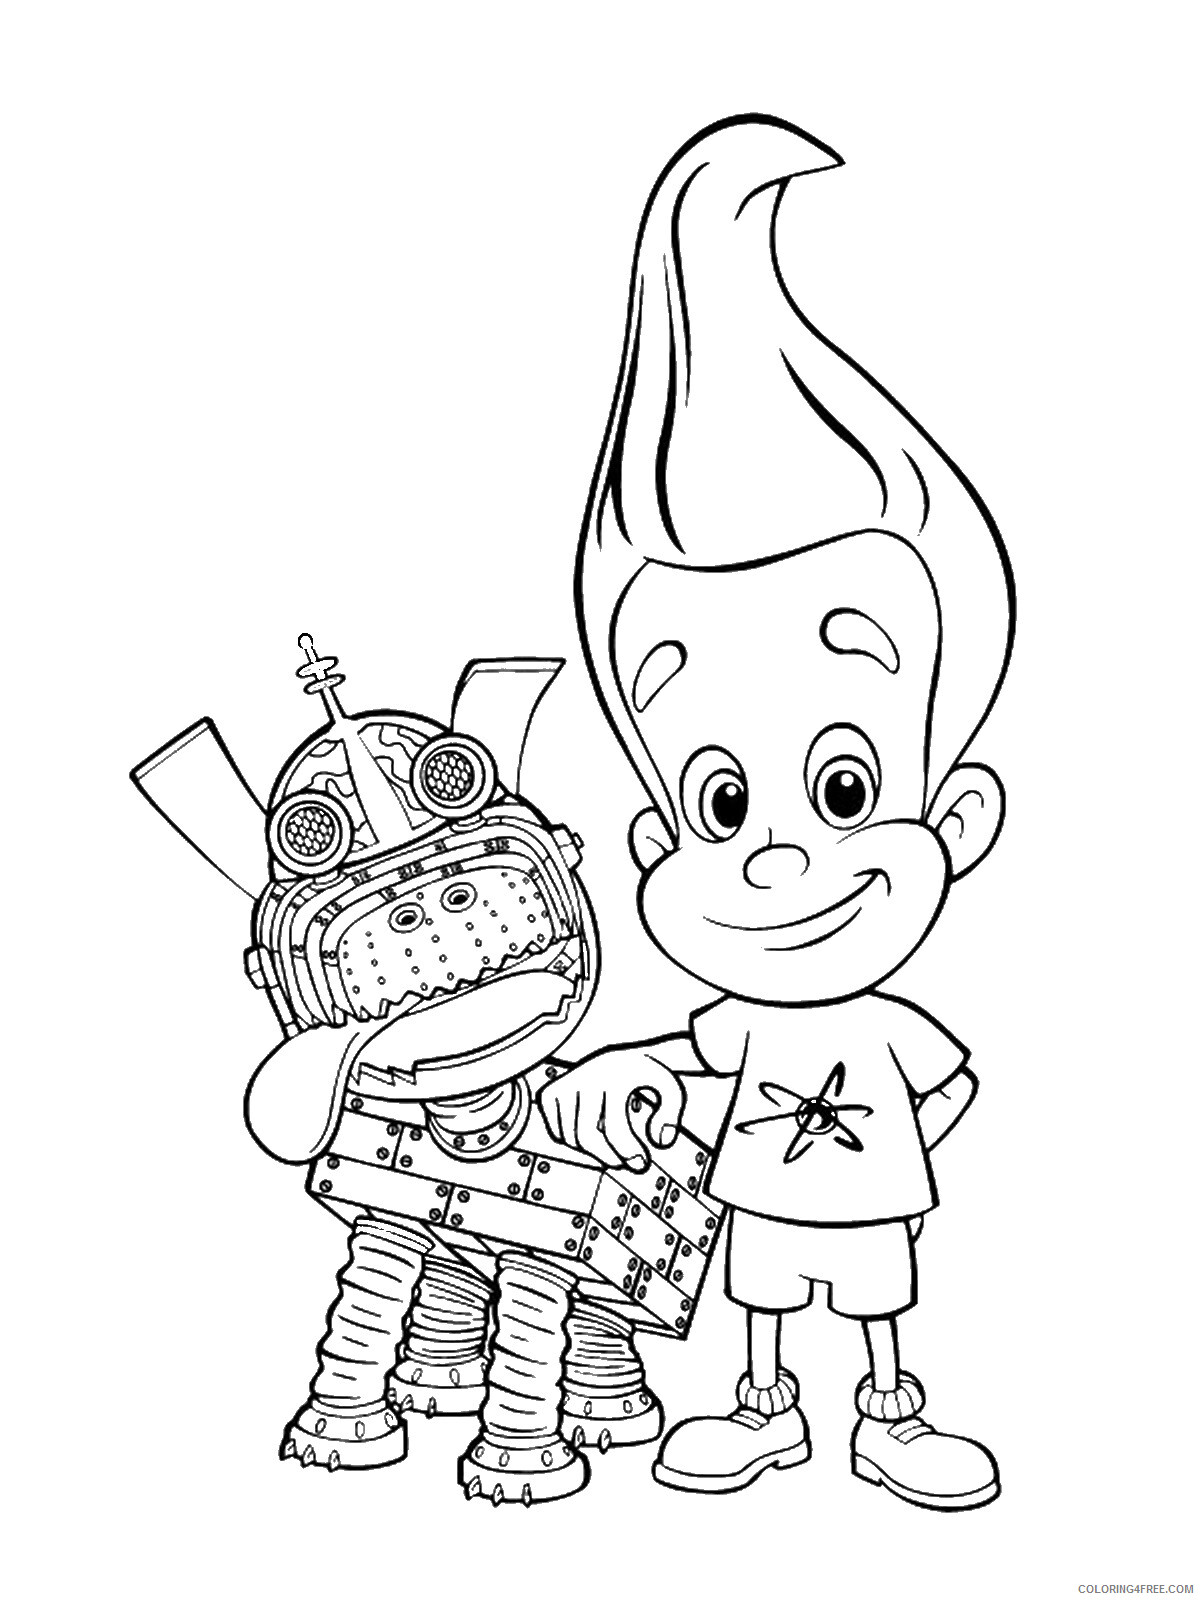 Jimmy Neutron Coloring Pages TV Film jimmy_neutron_cl27 Printable 2020 04140 Coloring4free